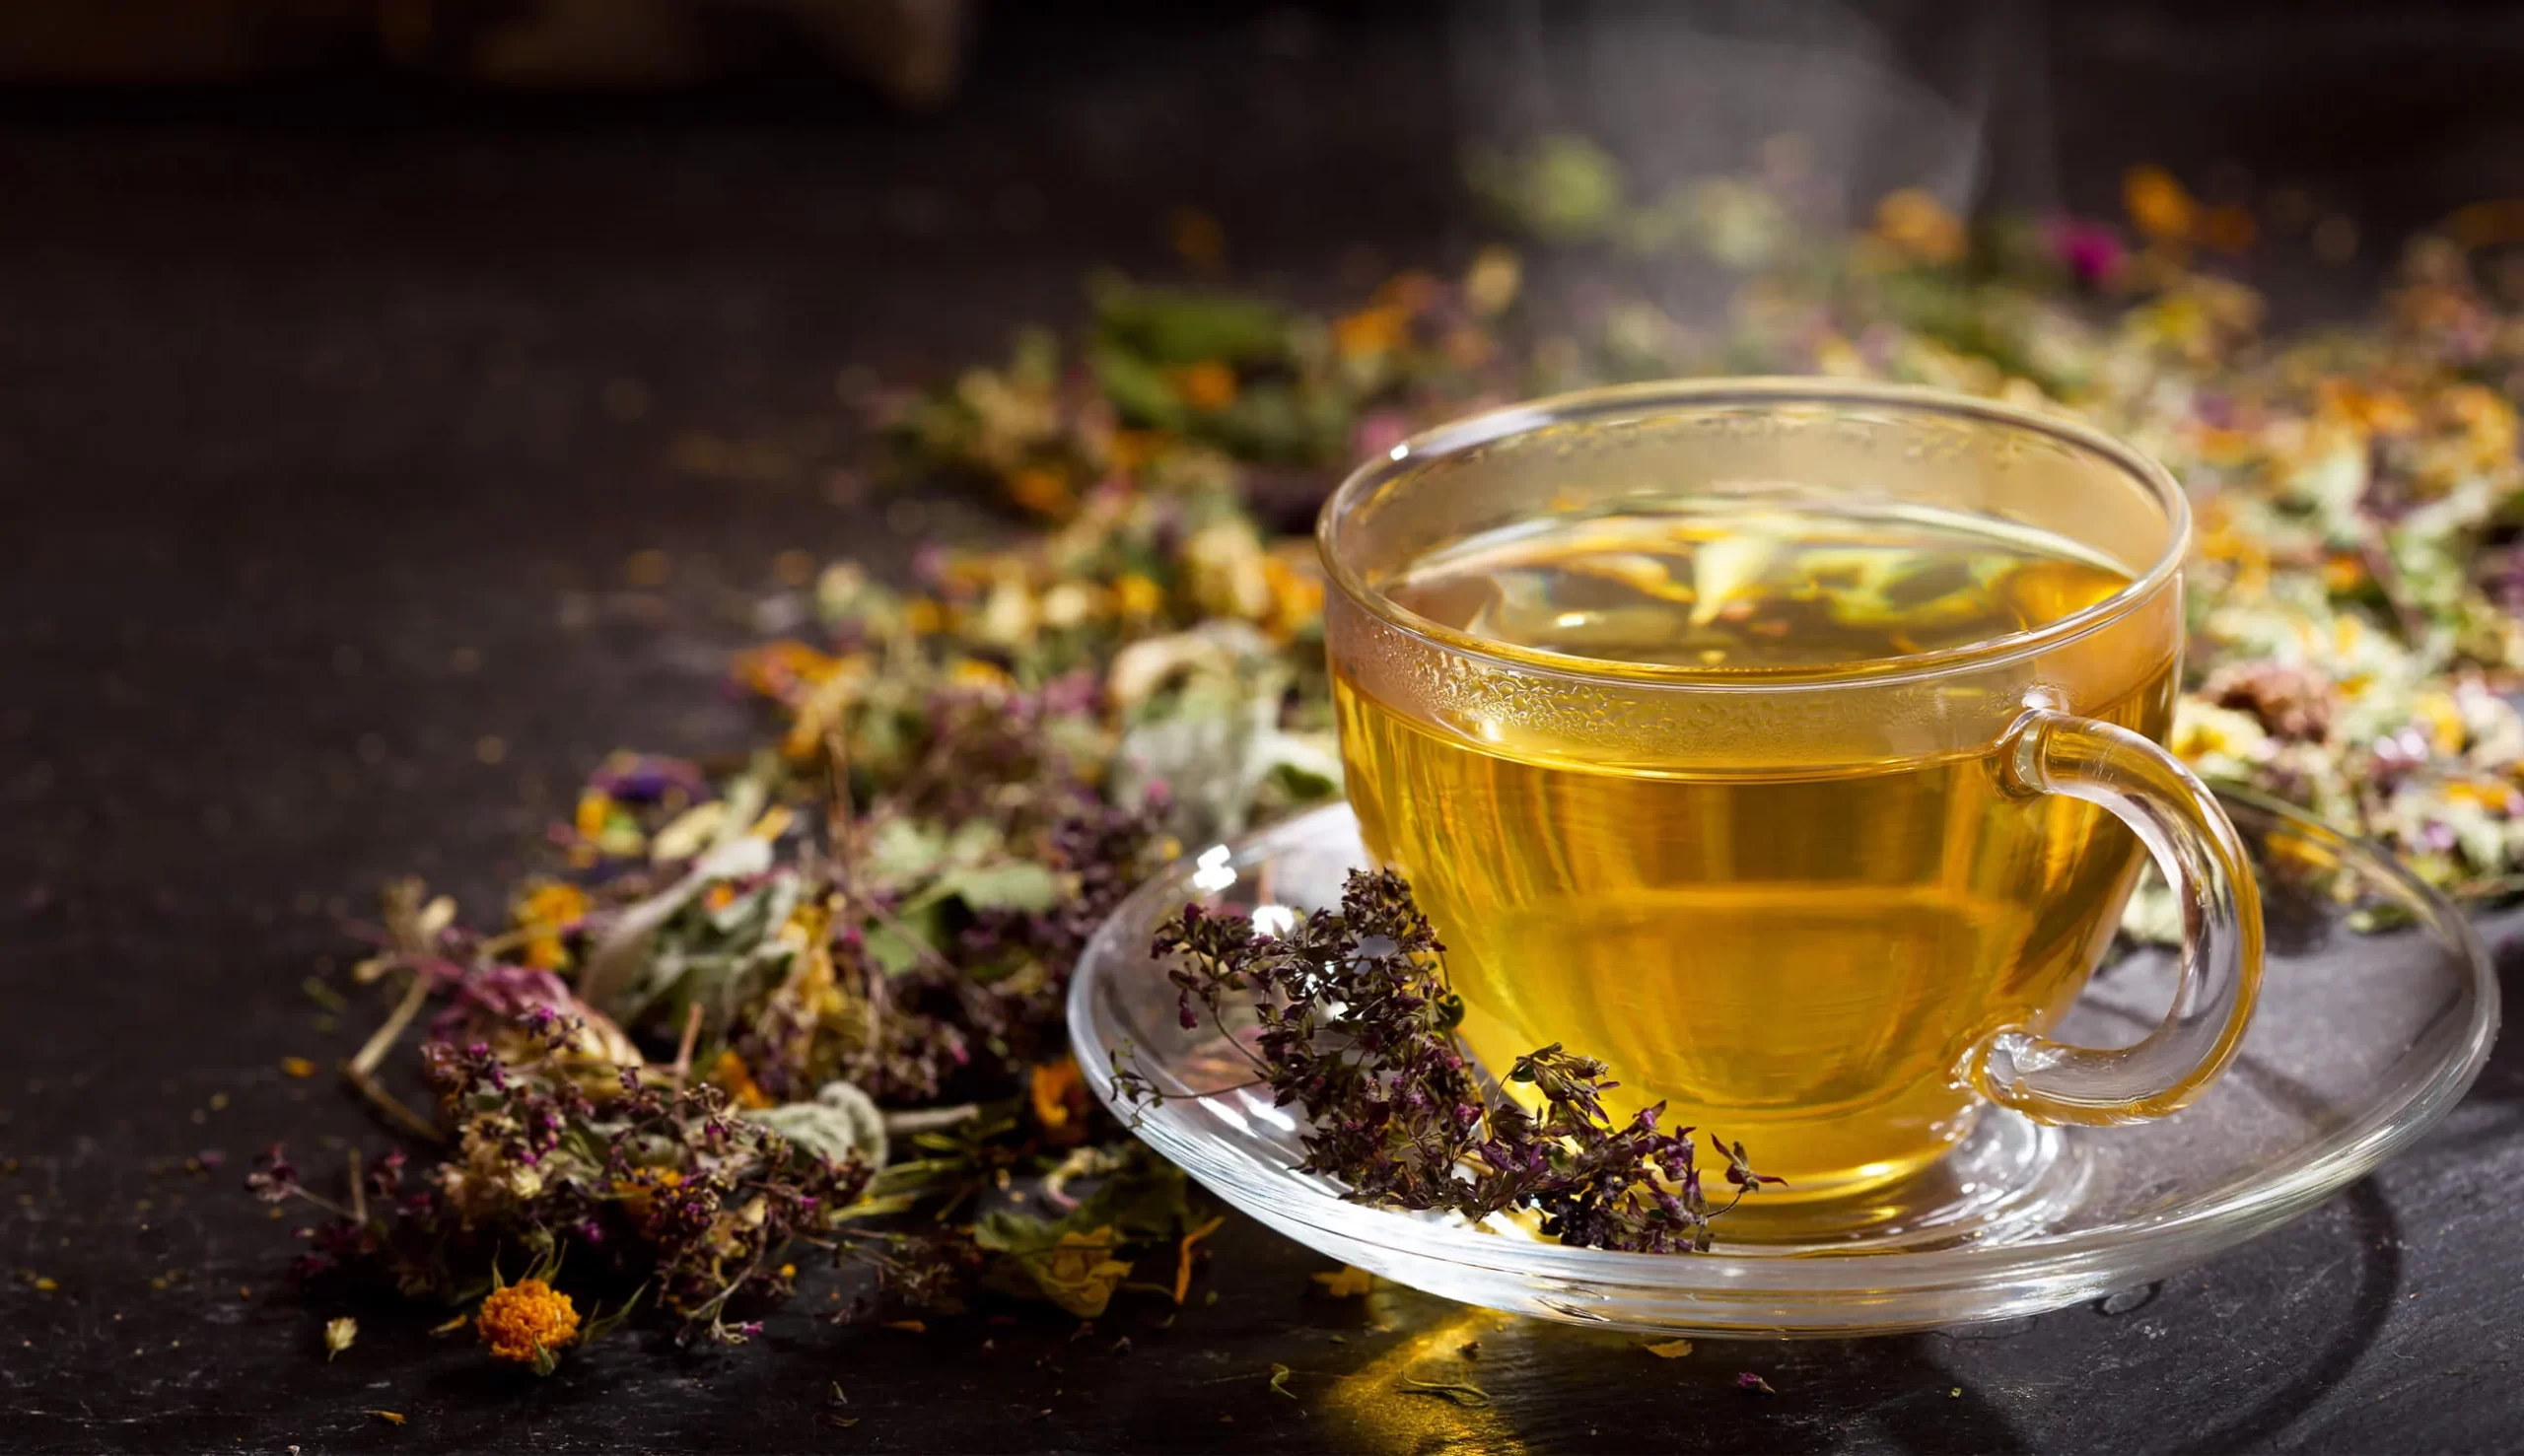 In what ways does tea help your wellbeing?